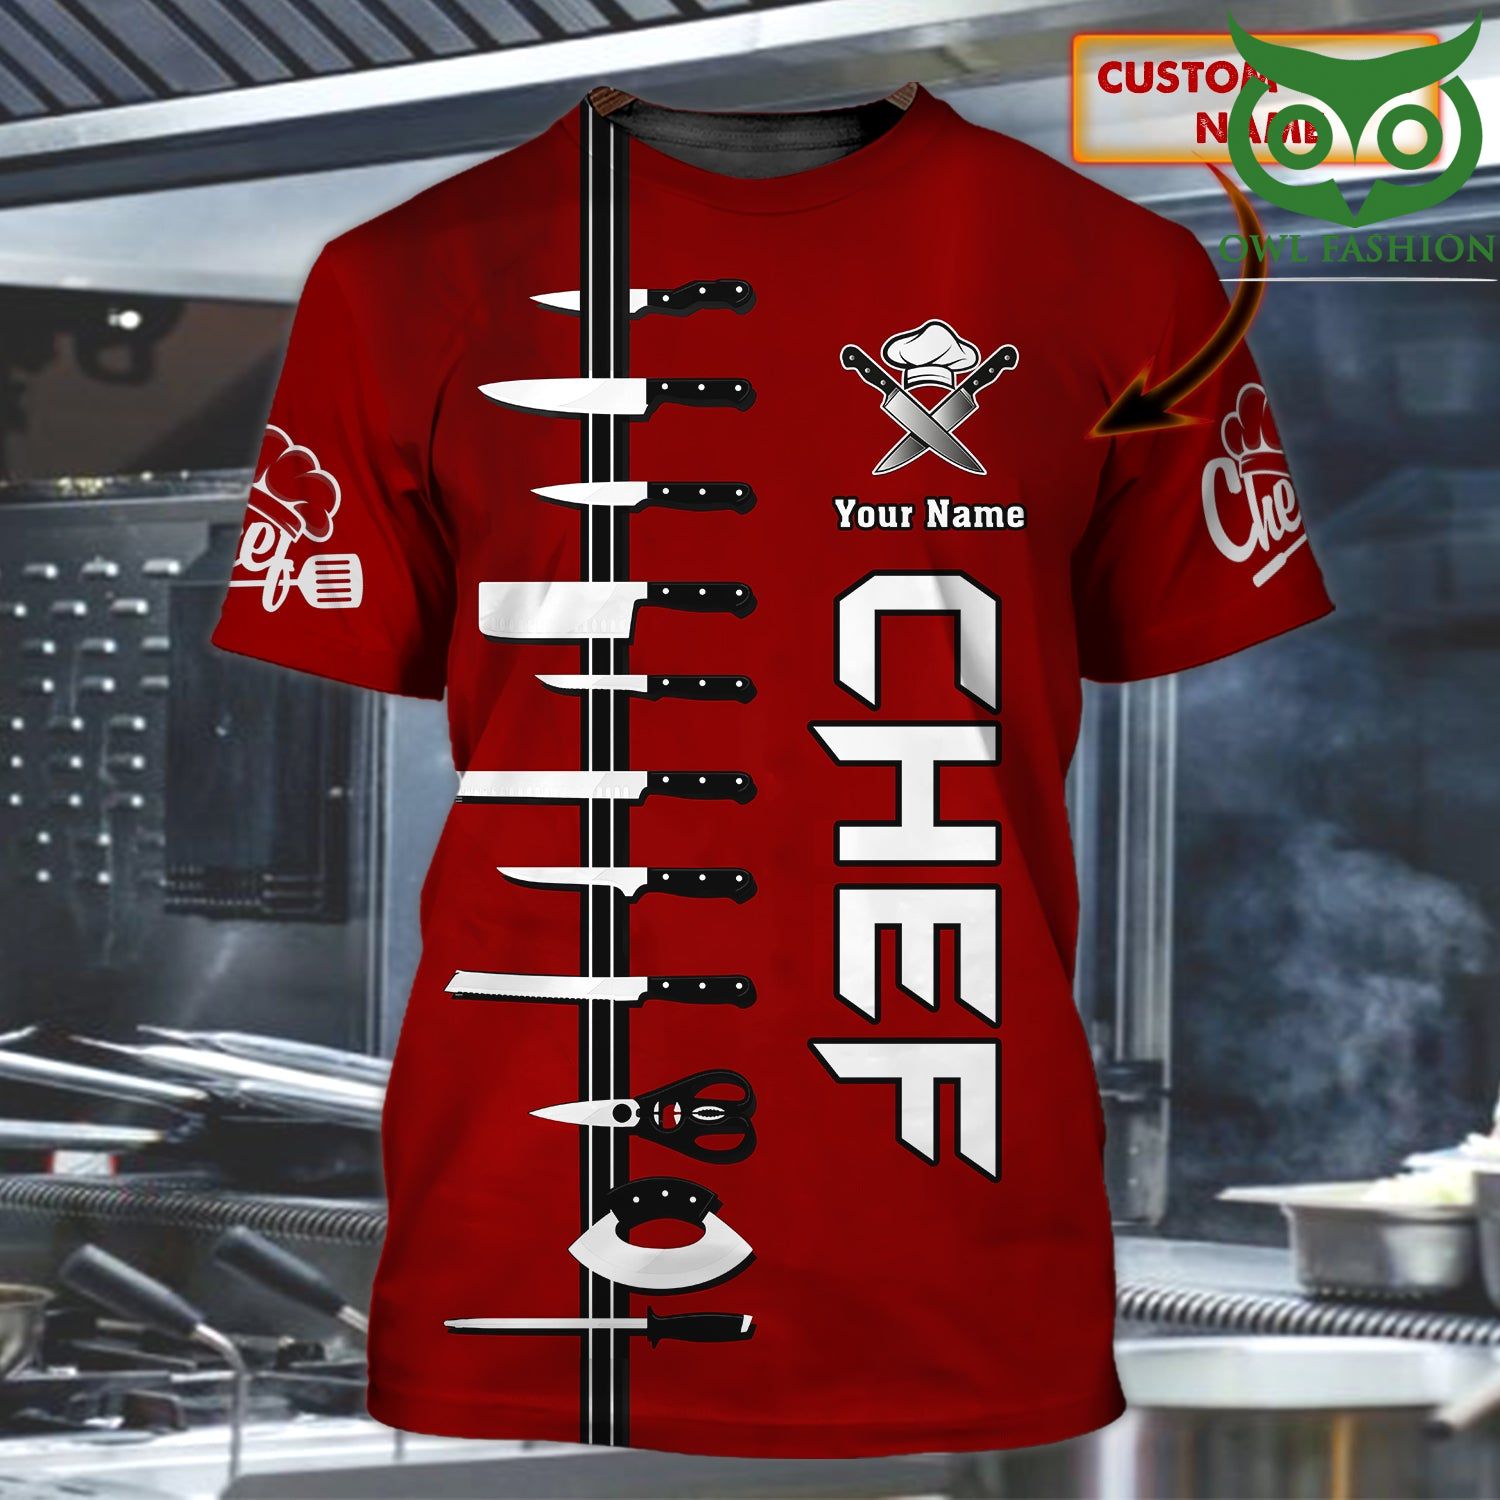 6 CHEF Knives Personalized Name red 3D Tshirt